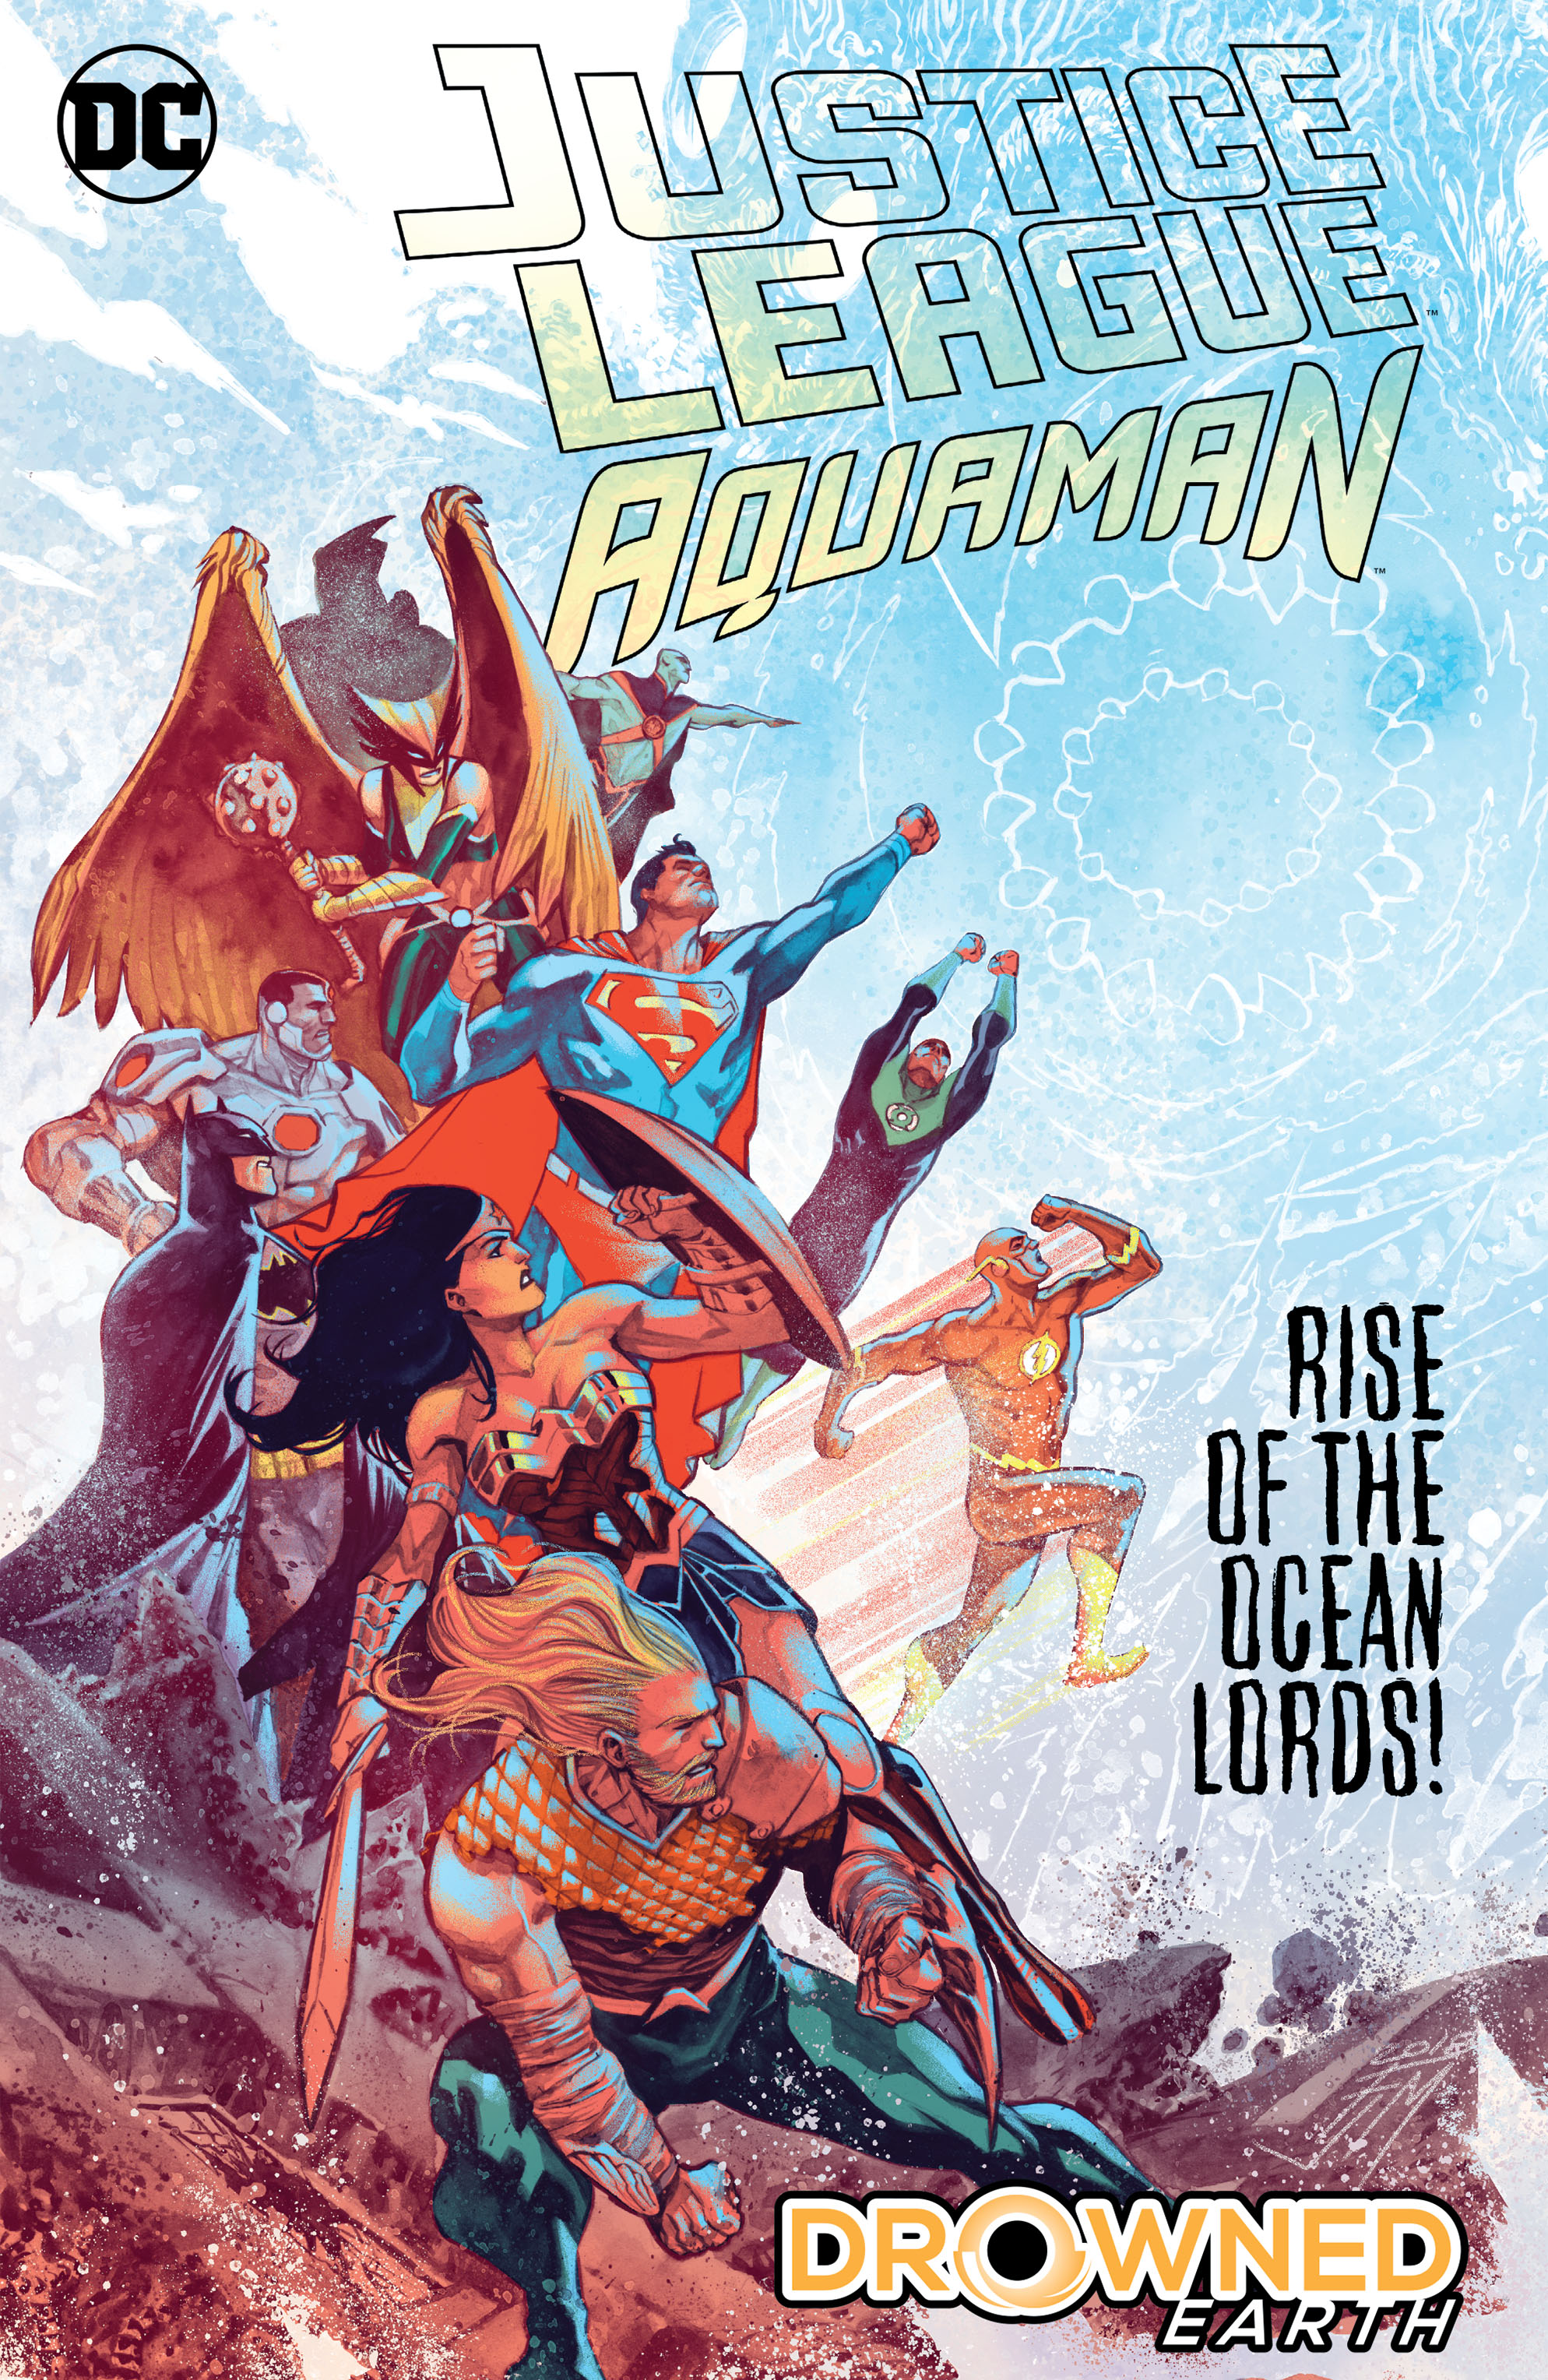 Read online Justice League/Aquaman: Drowned Earth comic -  Issue # TPB (Part 1) - 1